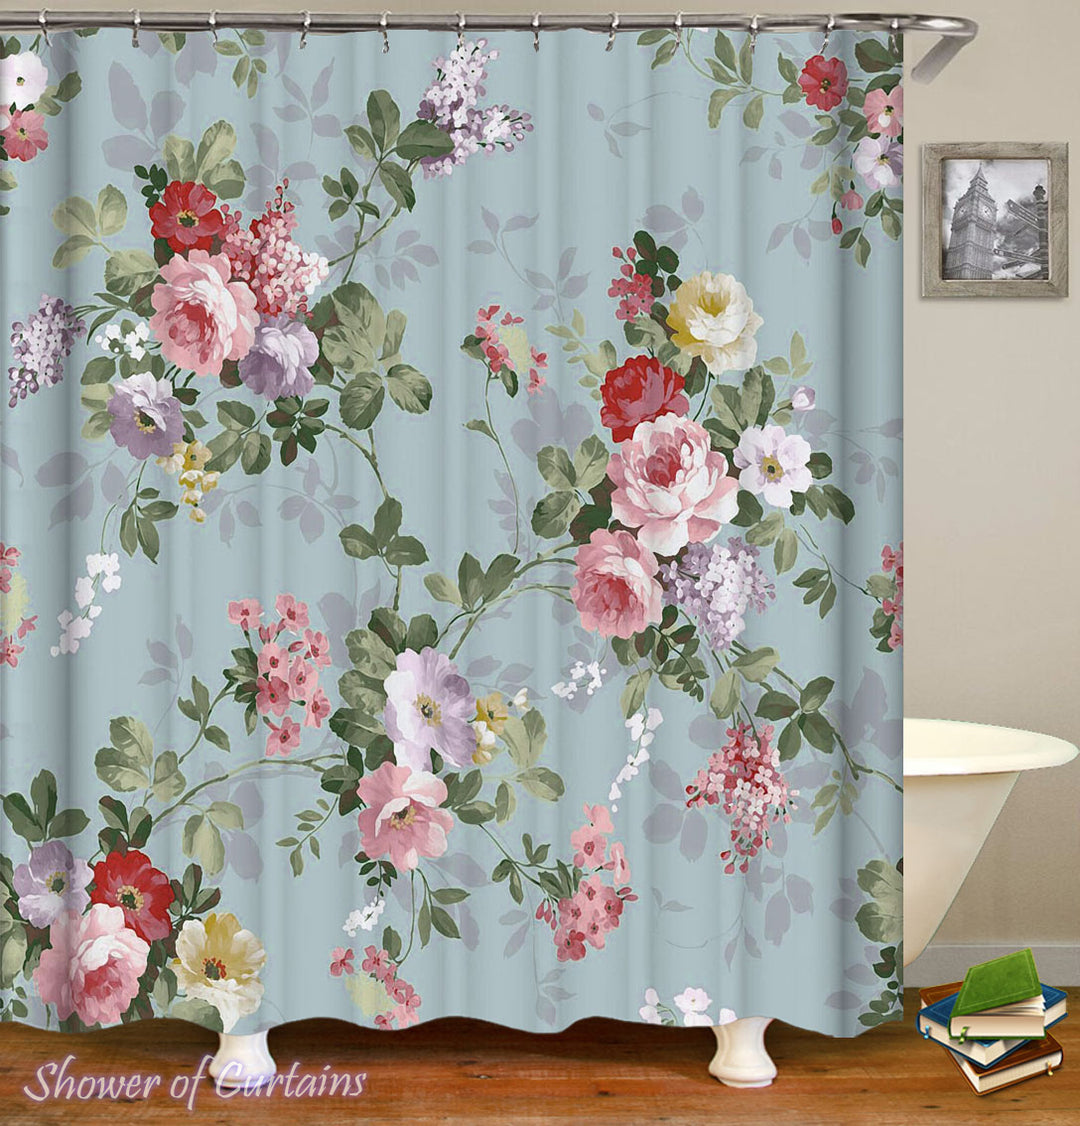 Shower Curtain of Classic Floristry theme